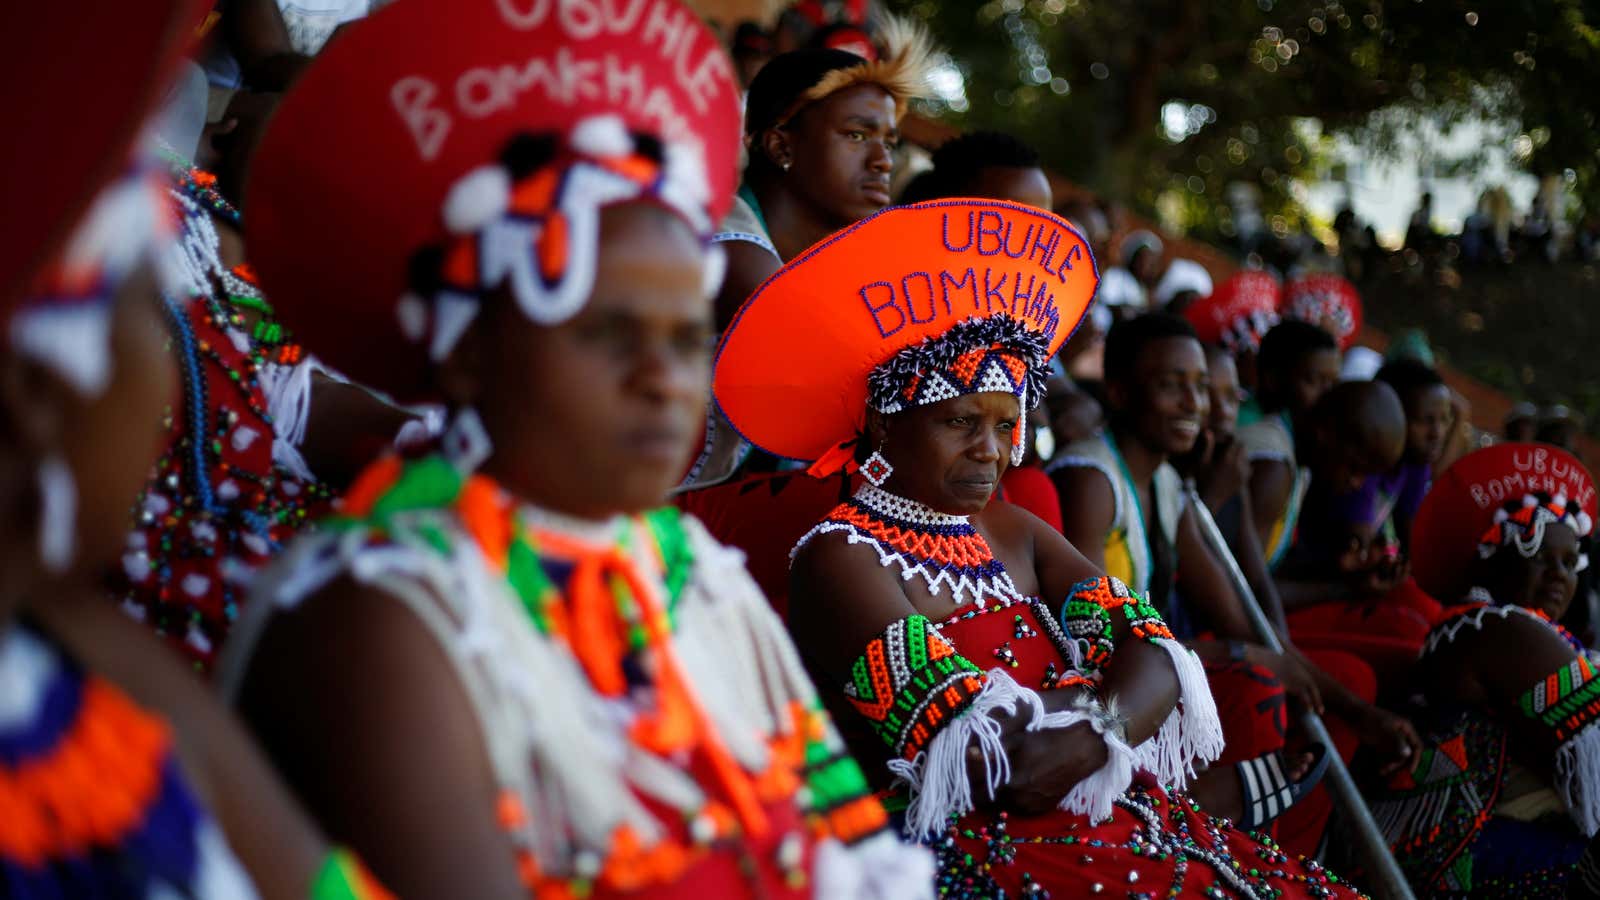 Contestants watch others perform during a Zulu dance competition in Durban.